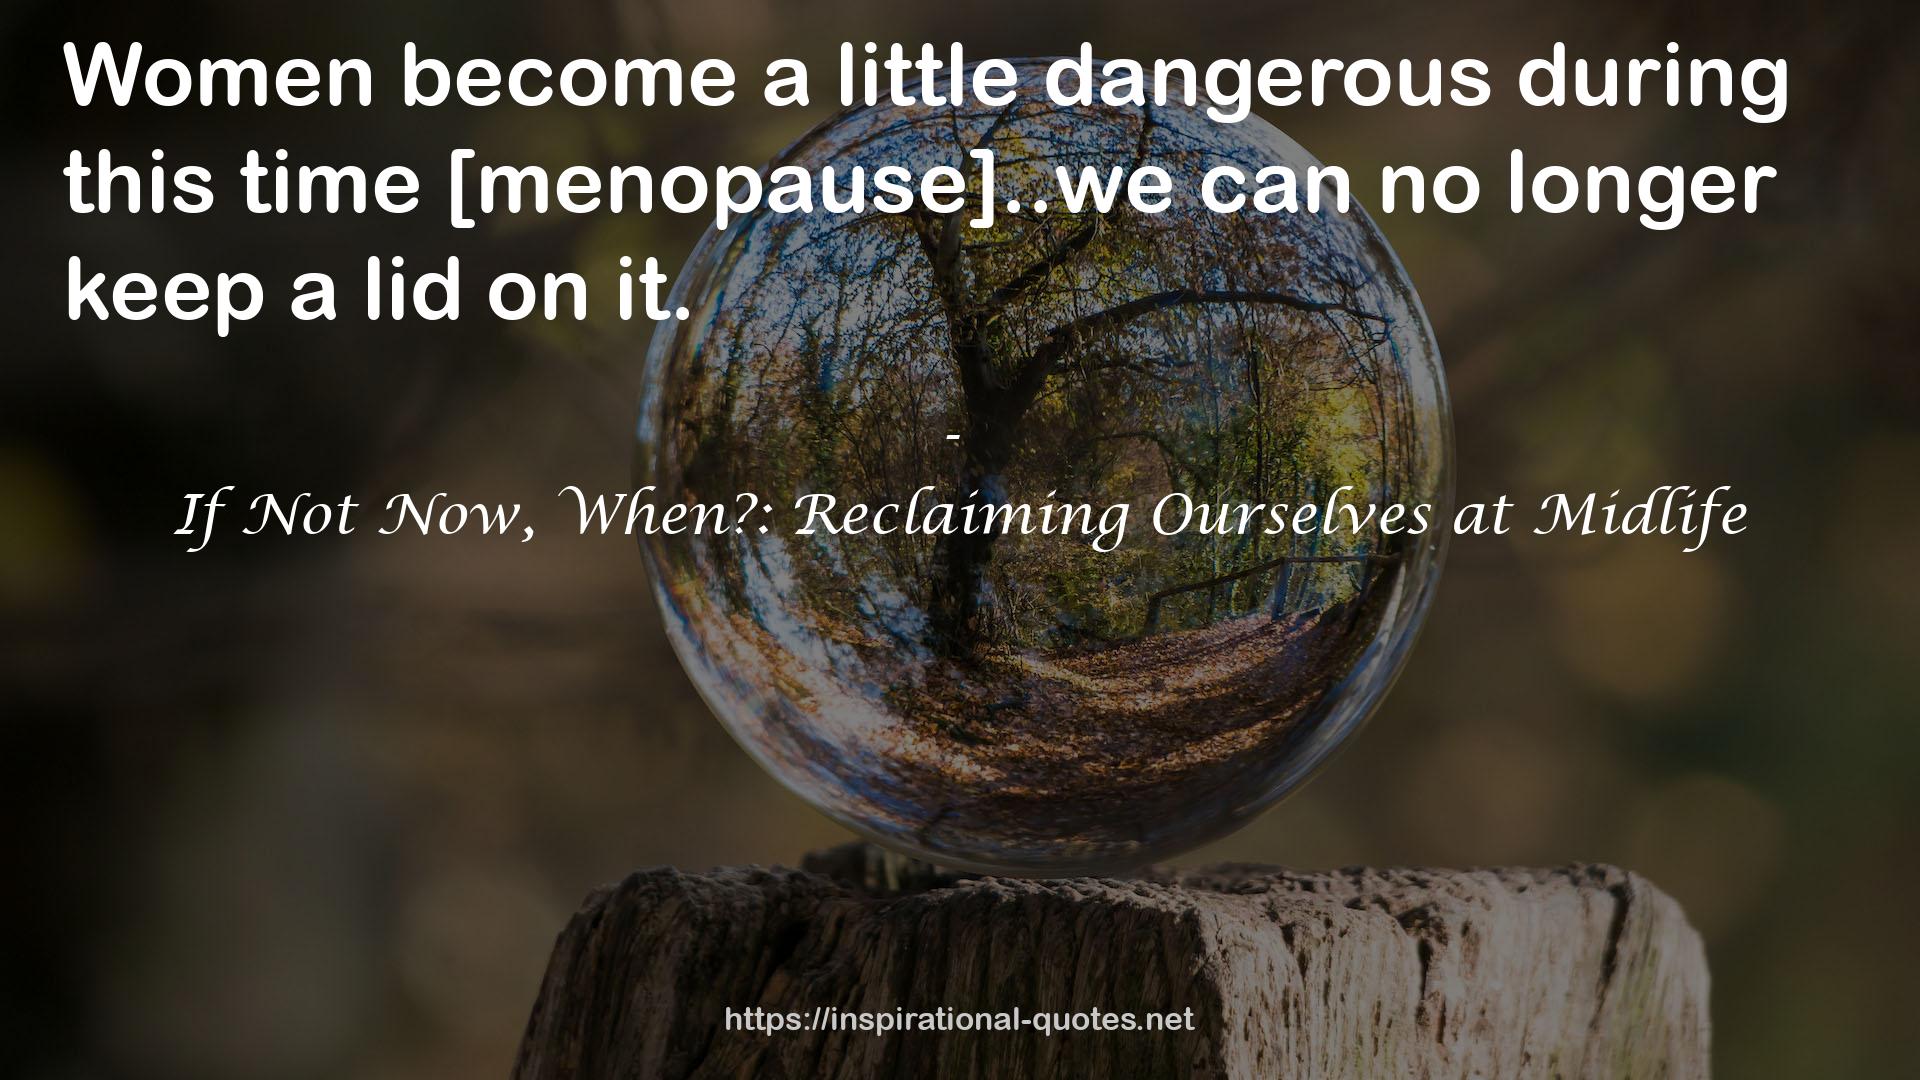 If Not Now, When?: Reclaiming Ourselves at Midlife QUOTES